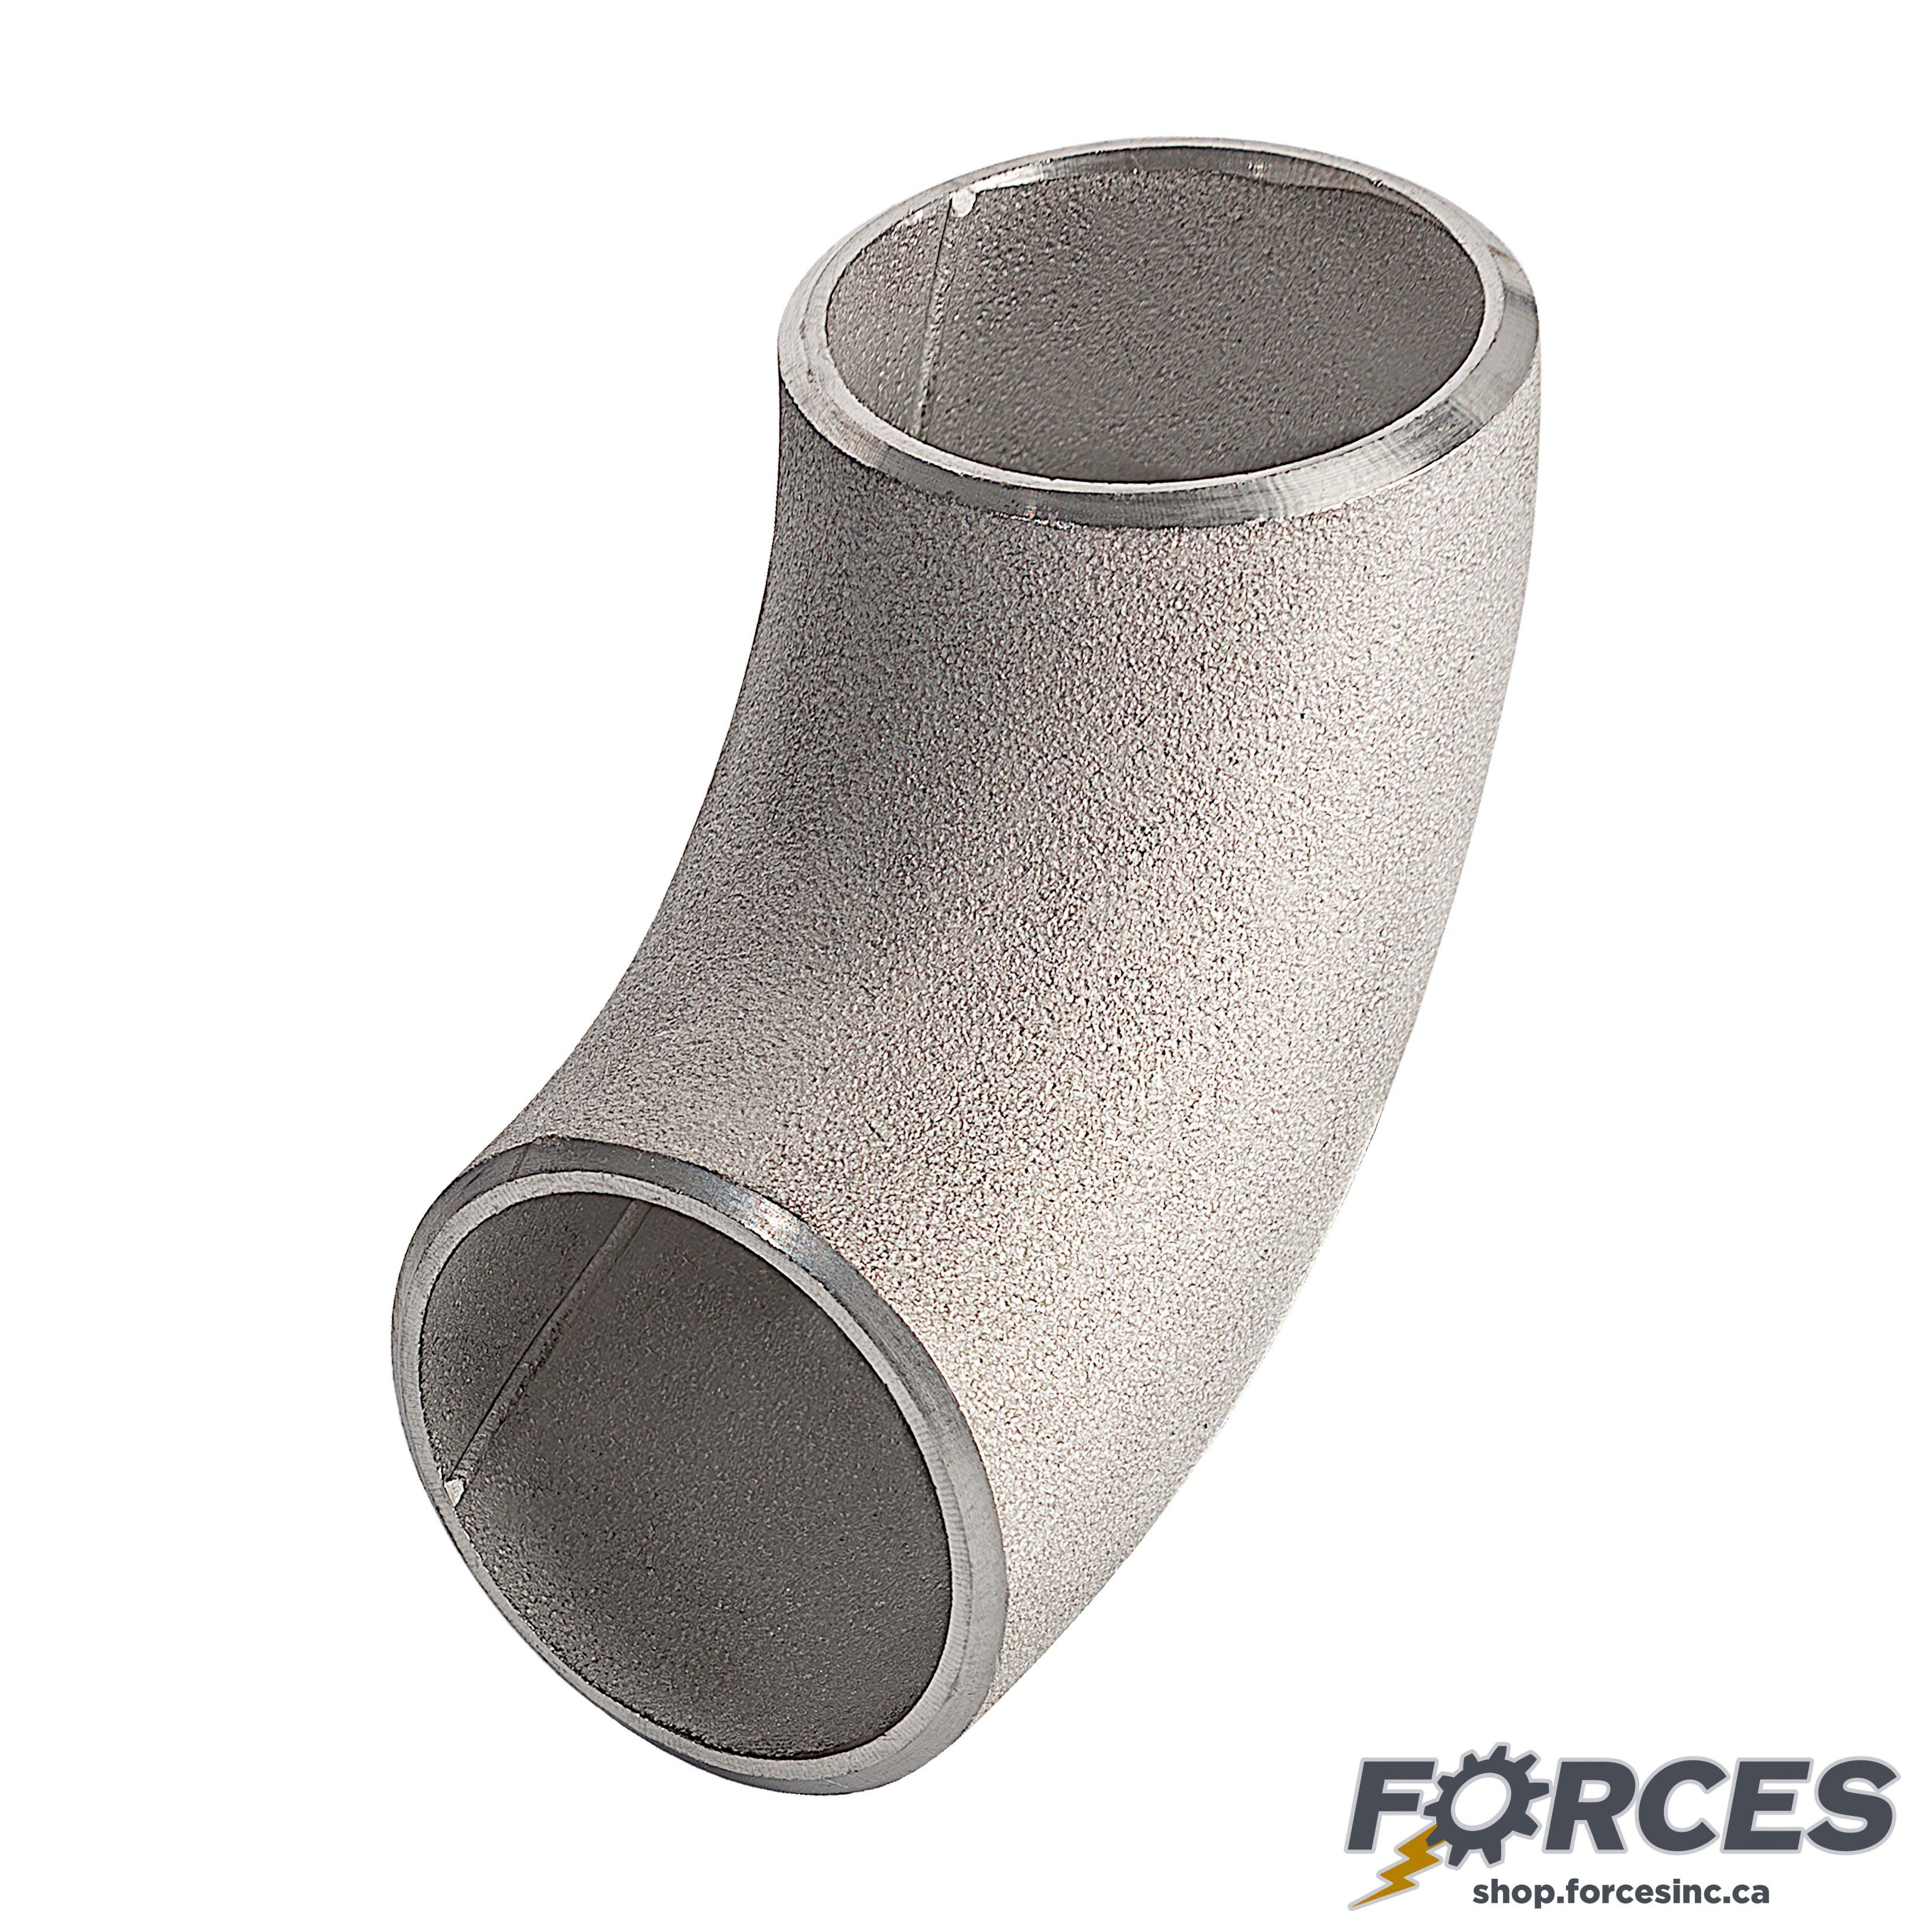 1-1/4" Elbow 90° SCH 10 Butt Weld - Stainless Steel 304 - Forces Inc